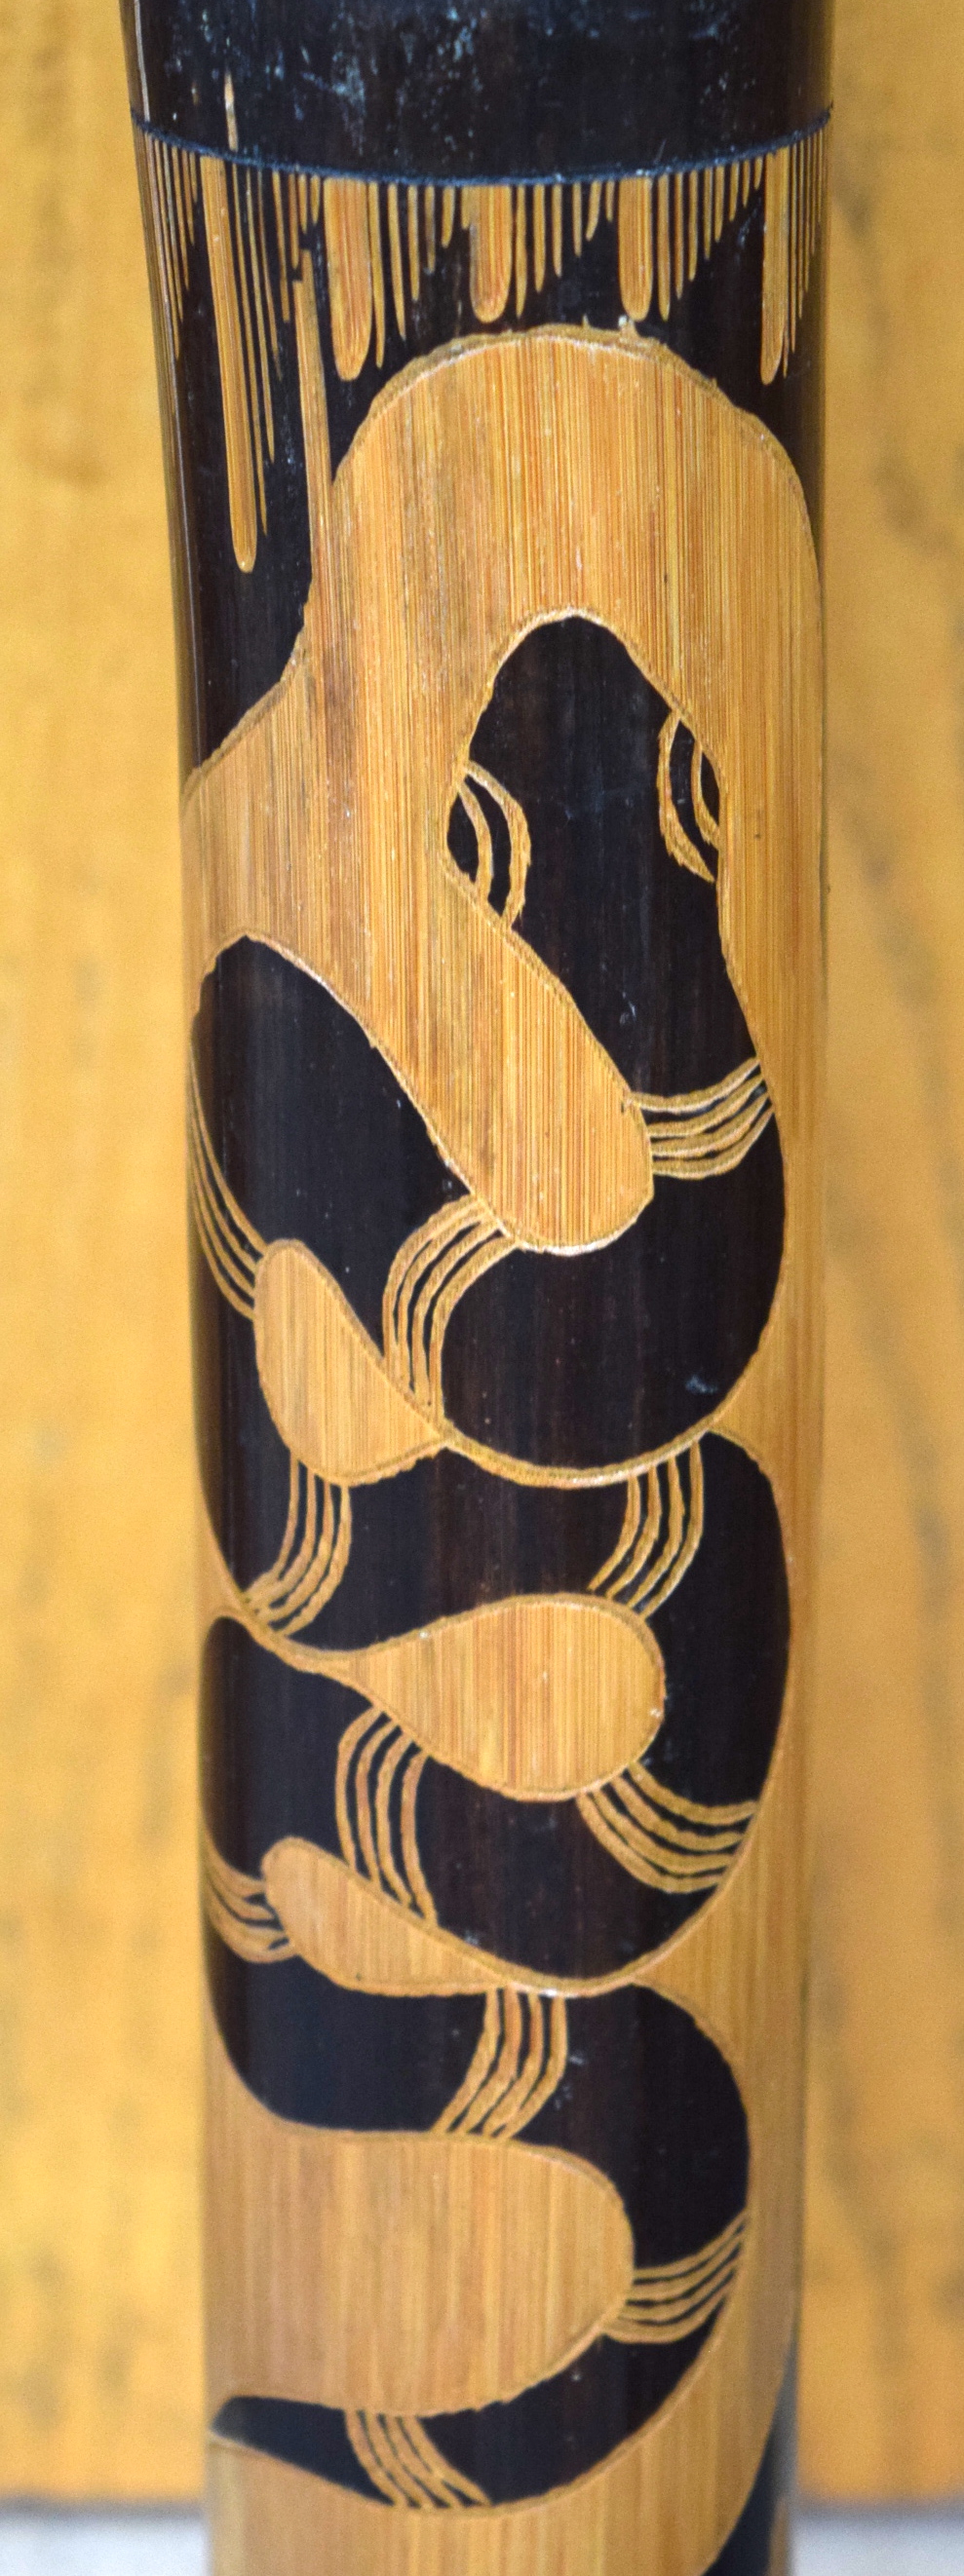 AN AUSTRALIAN ABORIGINAL DIDGERIDOO, carved with a snake and a fish. 120.5 cm long - Image 5 of 5